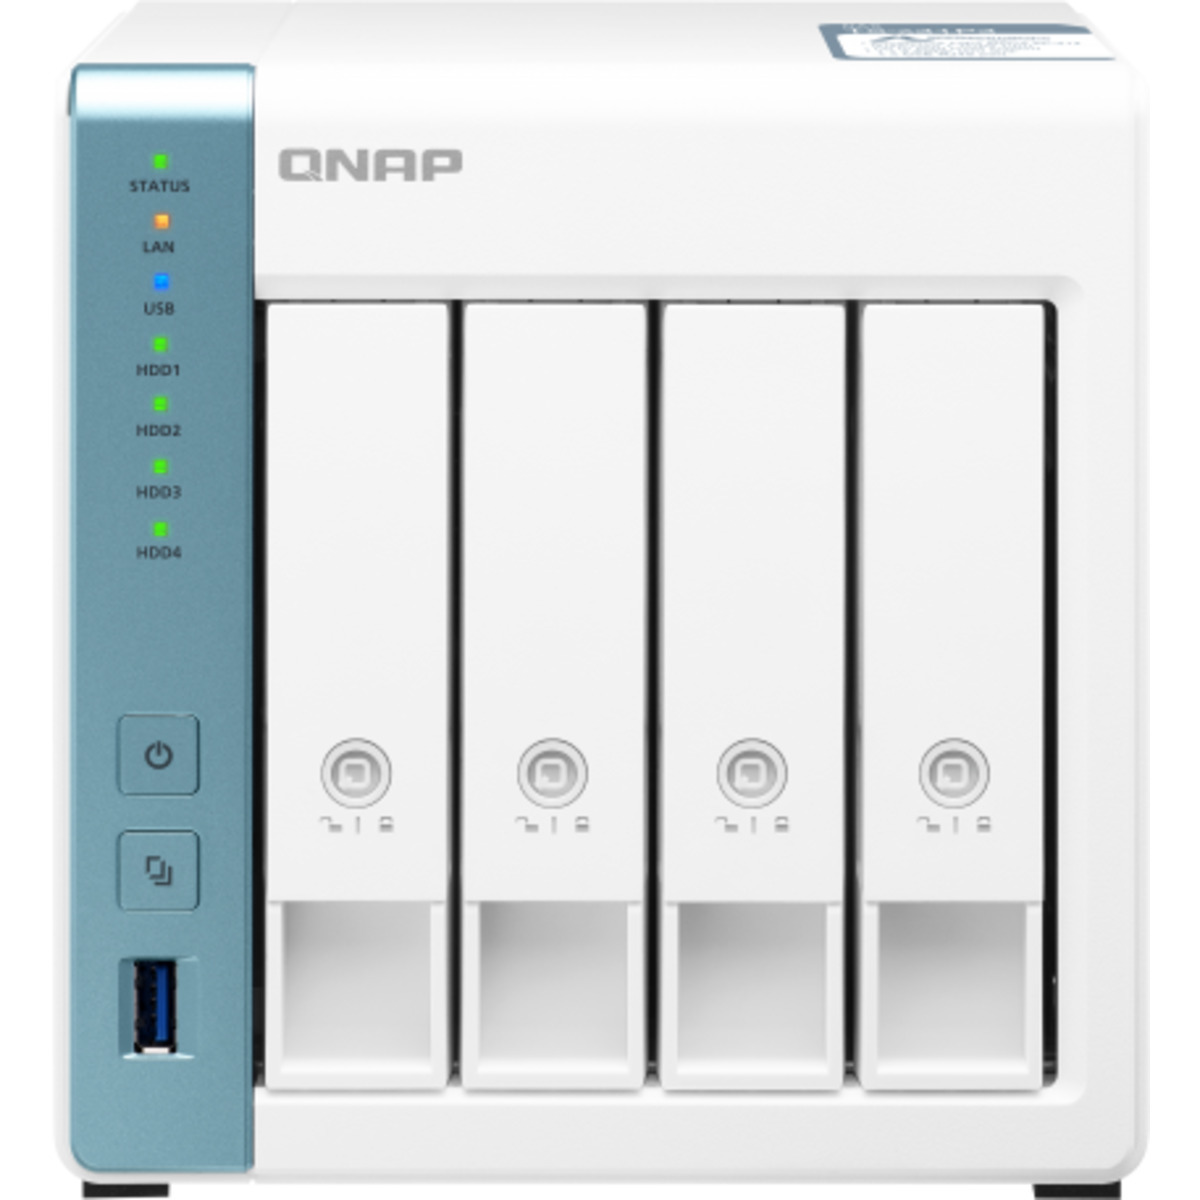 buy $2122 QNAP TS-431P3 80tb Desktop NAS - Network Attached Storage Device 4x20000gb Seagate EXOS X20 ST20000NM007D 3.5 7200rpm SATA 6Gb/s HDD ENTERPRISE Class Drives Installed - Burn-In Tested - FREE RAM UPGRADE - nas headquarters buy network attached storage server device das new raid-5 free shipping simply usa TS-431P3